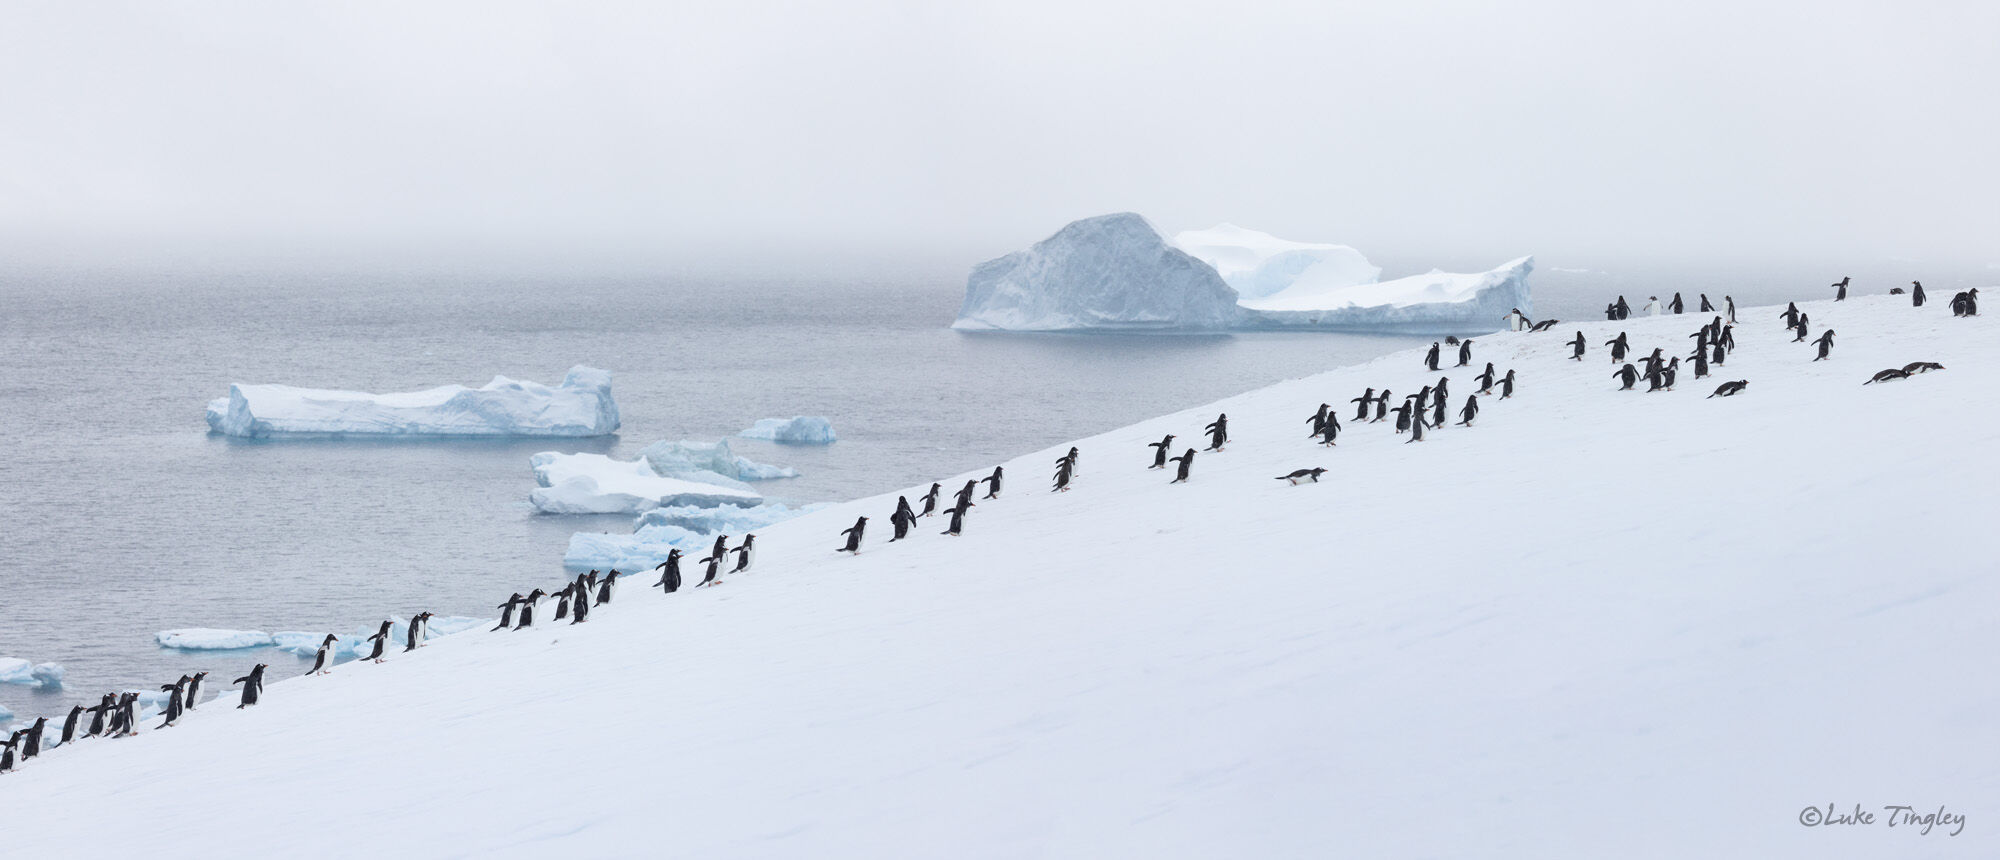 A Gentoo penguin colony arrives on Danko island and proceeds to scramble to the top.